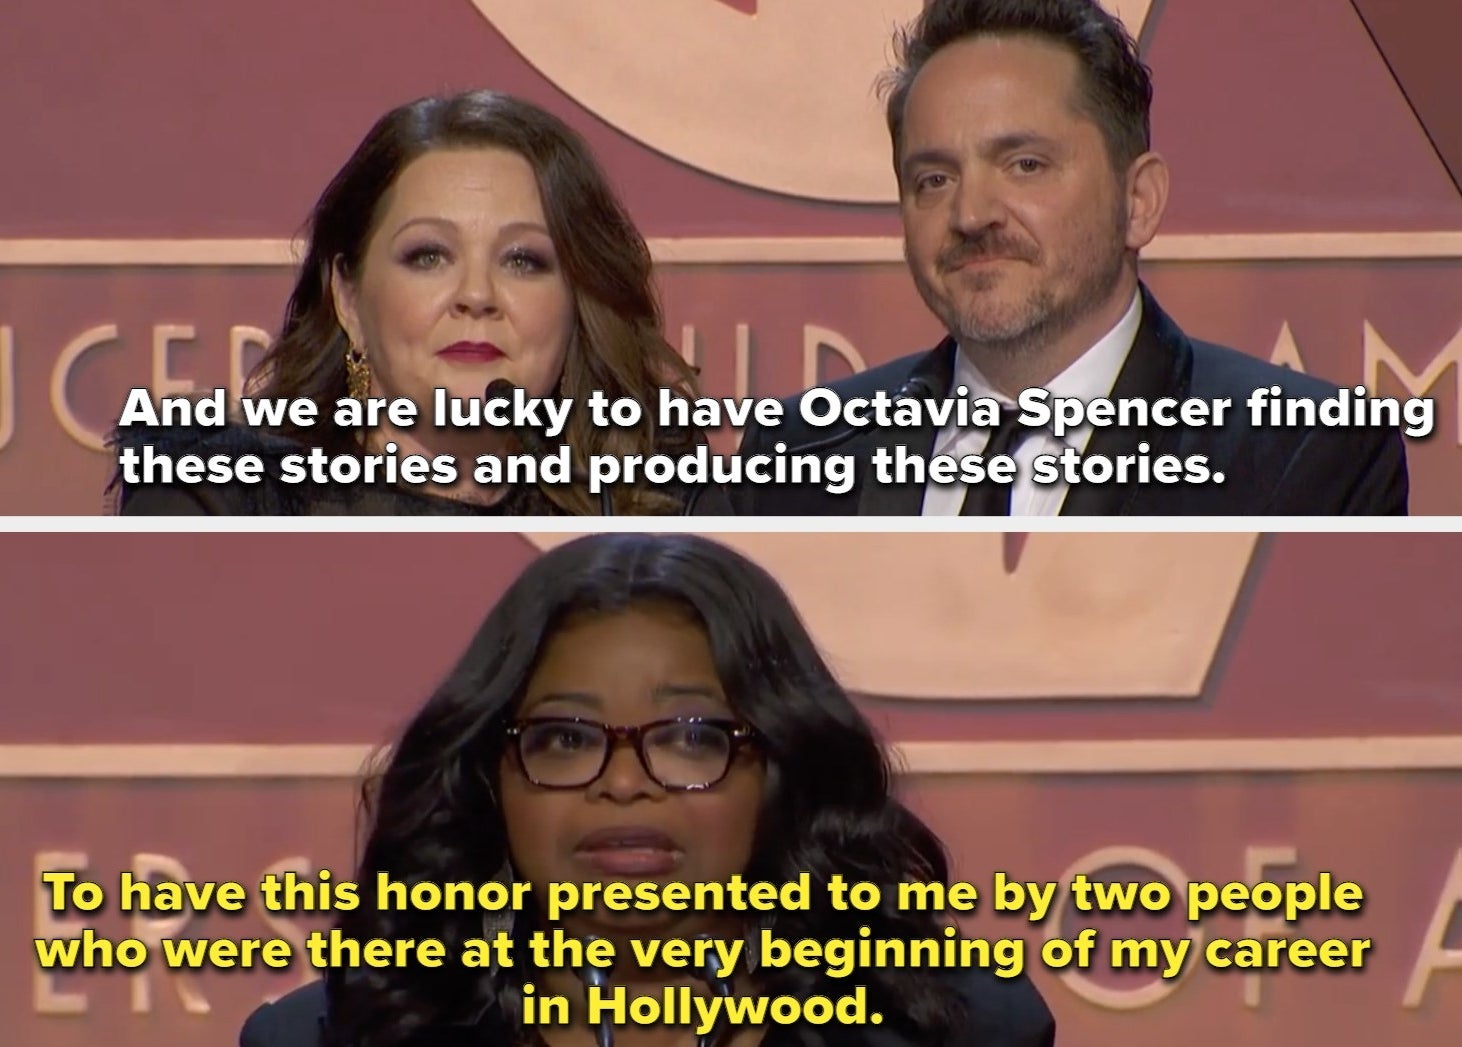 Melissa McCarthy and Ben Falcone presenting the award and Octavia Spencer talking about how long they have known each other